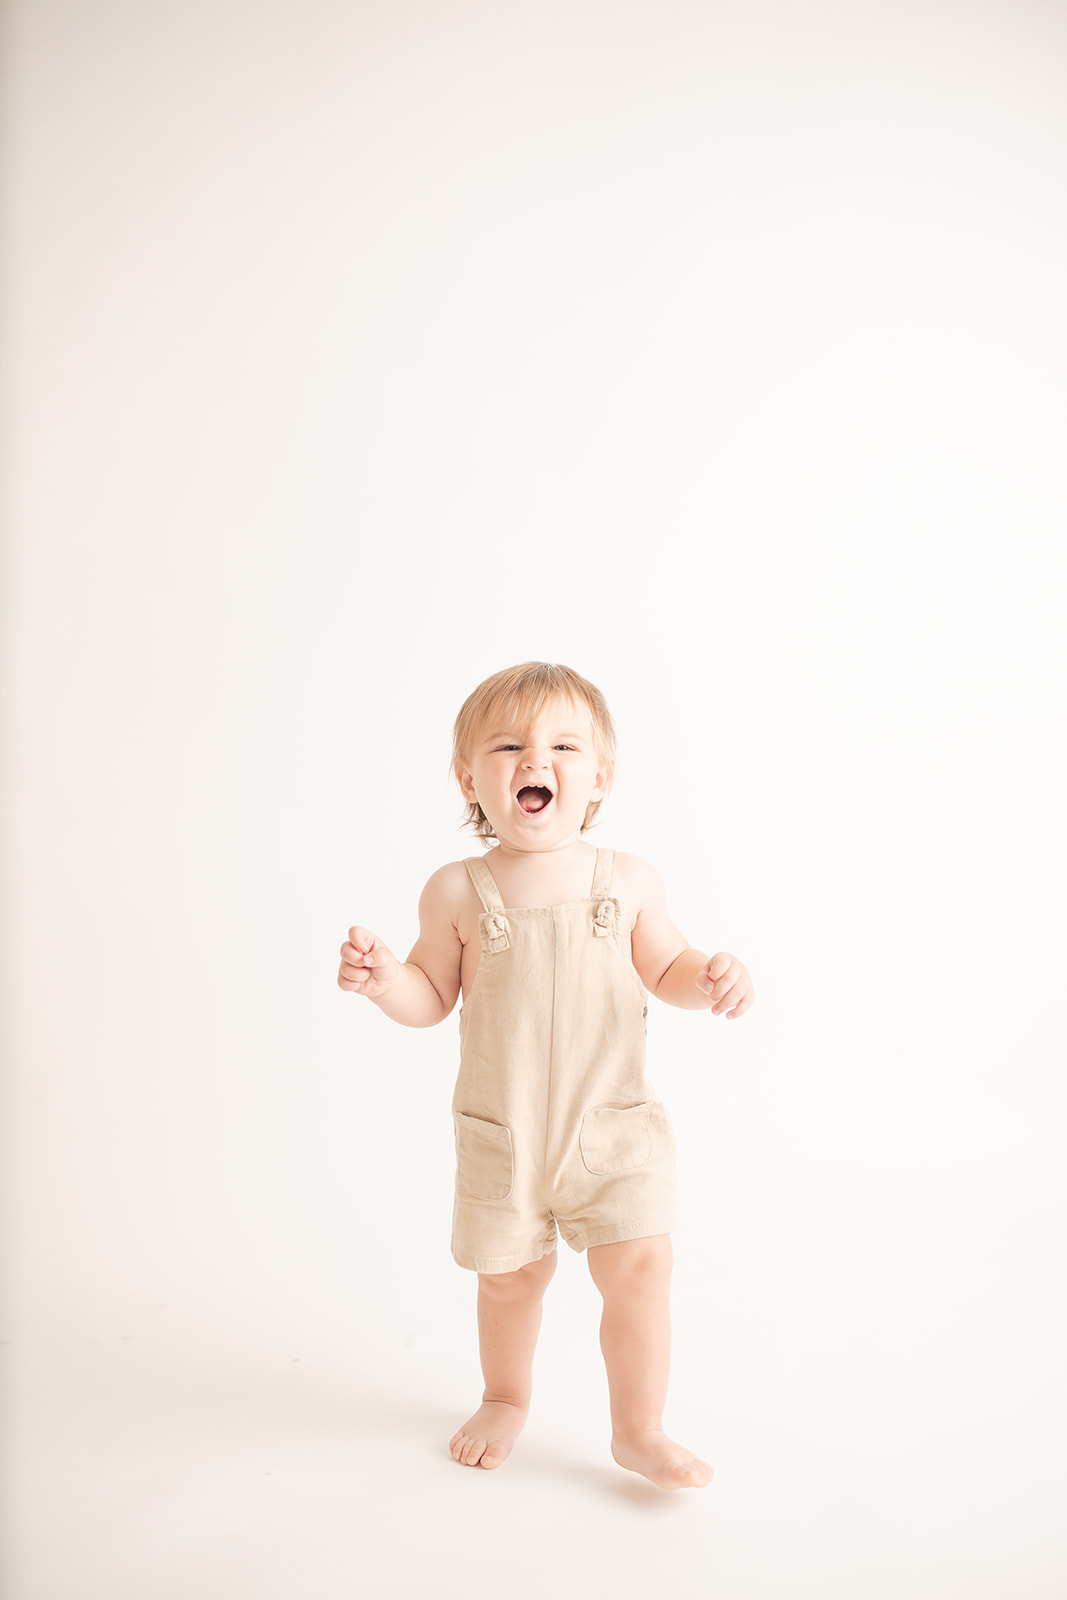 A young toddler boy makes silly faces while walking through a studio in tan overalls